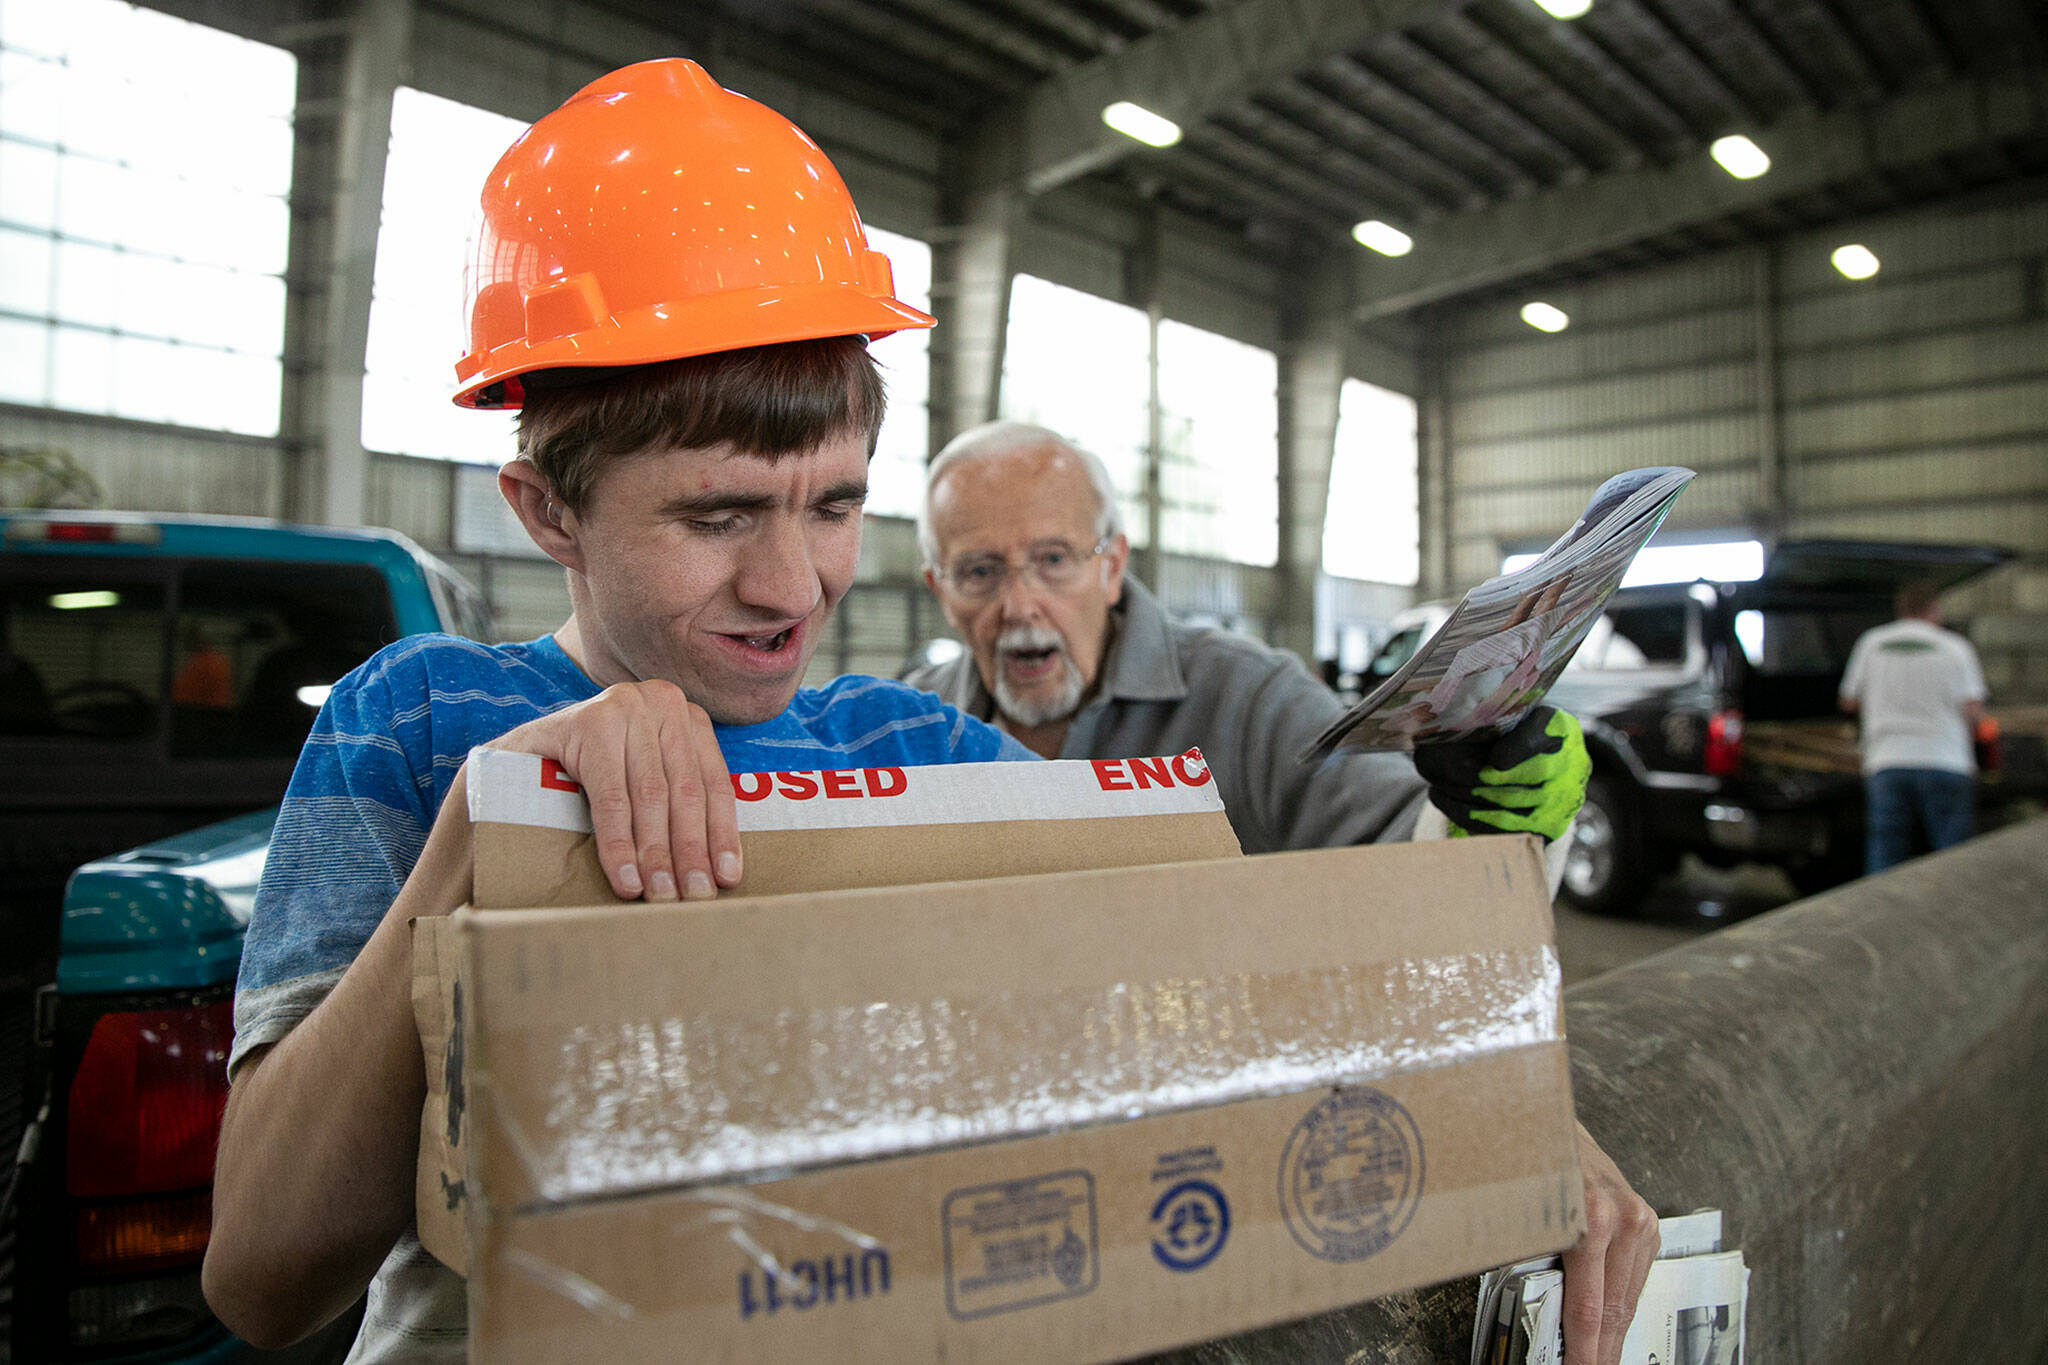 Joel Christensen, donning a hardhat gifted to him from employees at the Airport Road Recycling & Transfer Station in Everett, tosses old newspapers with the guidance of his grandfather, Harold Christensen. (Ryan Berry / The Herald)